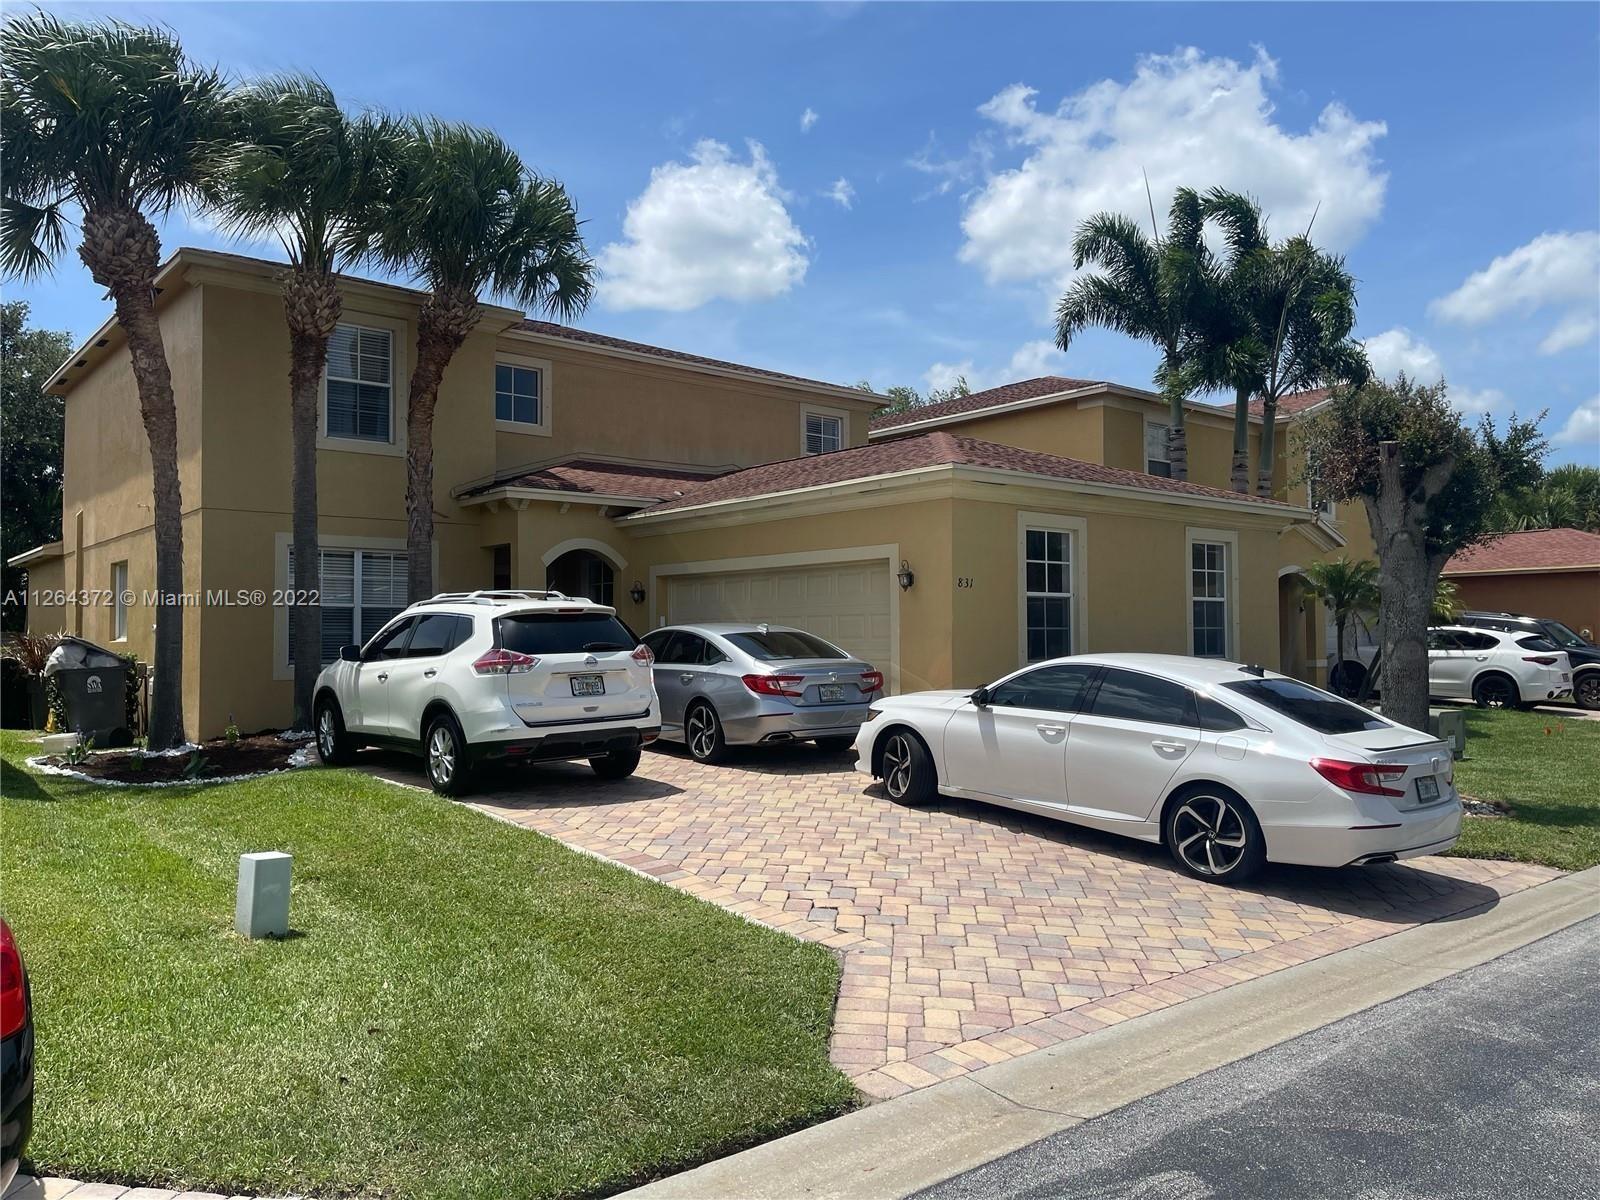 BEAUTIFULLY UPGRADED 2-STORY SINGLE-FAMILY HOME IN THE QUIET SUNTERRA COMMUNITY IN WEST PALM BEACH. 